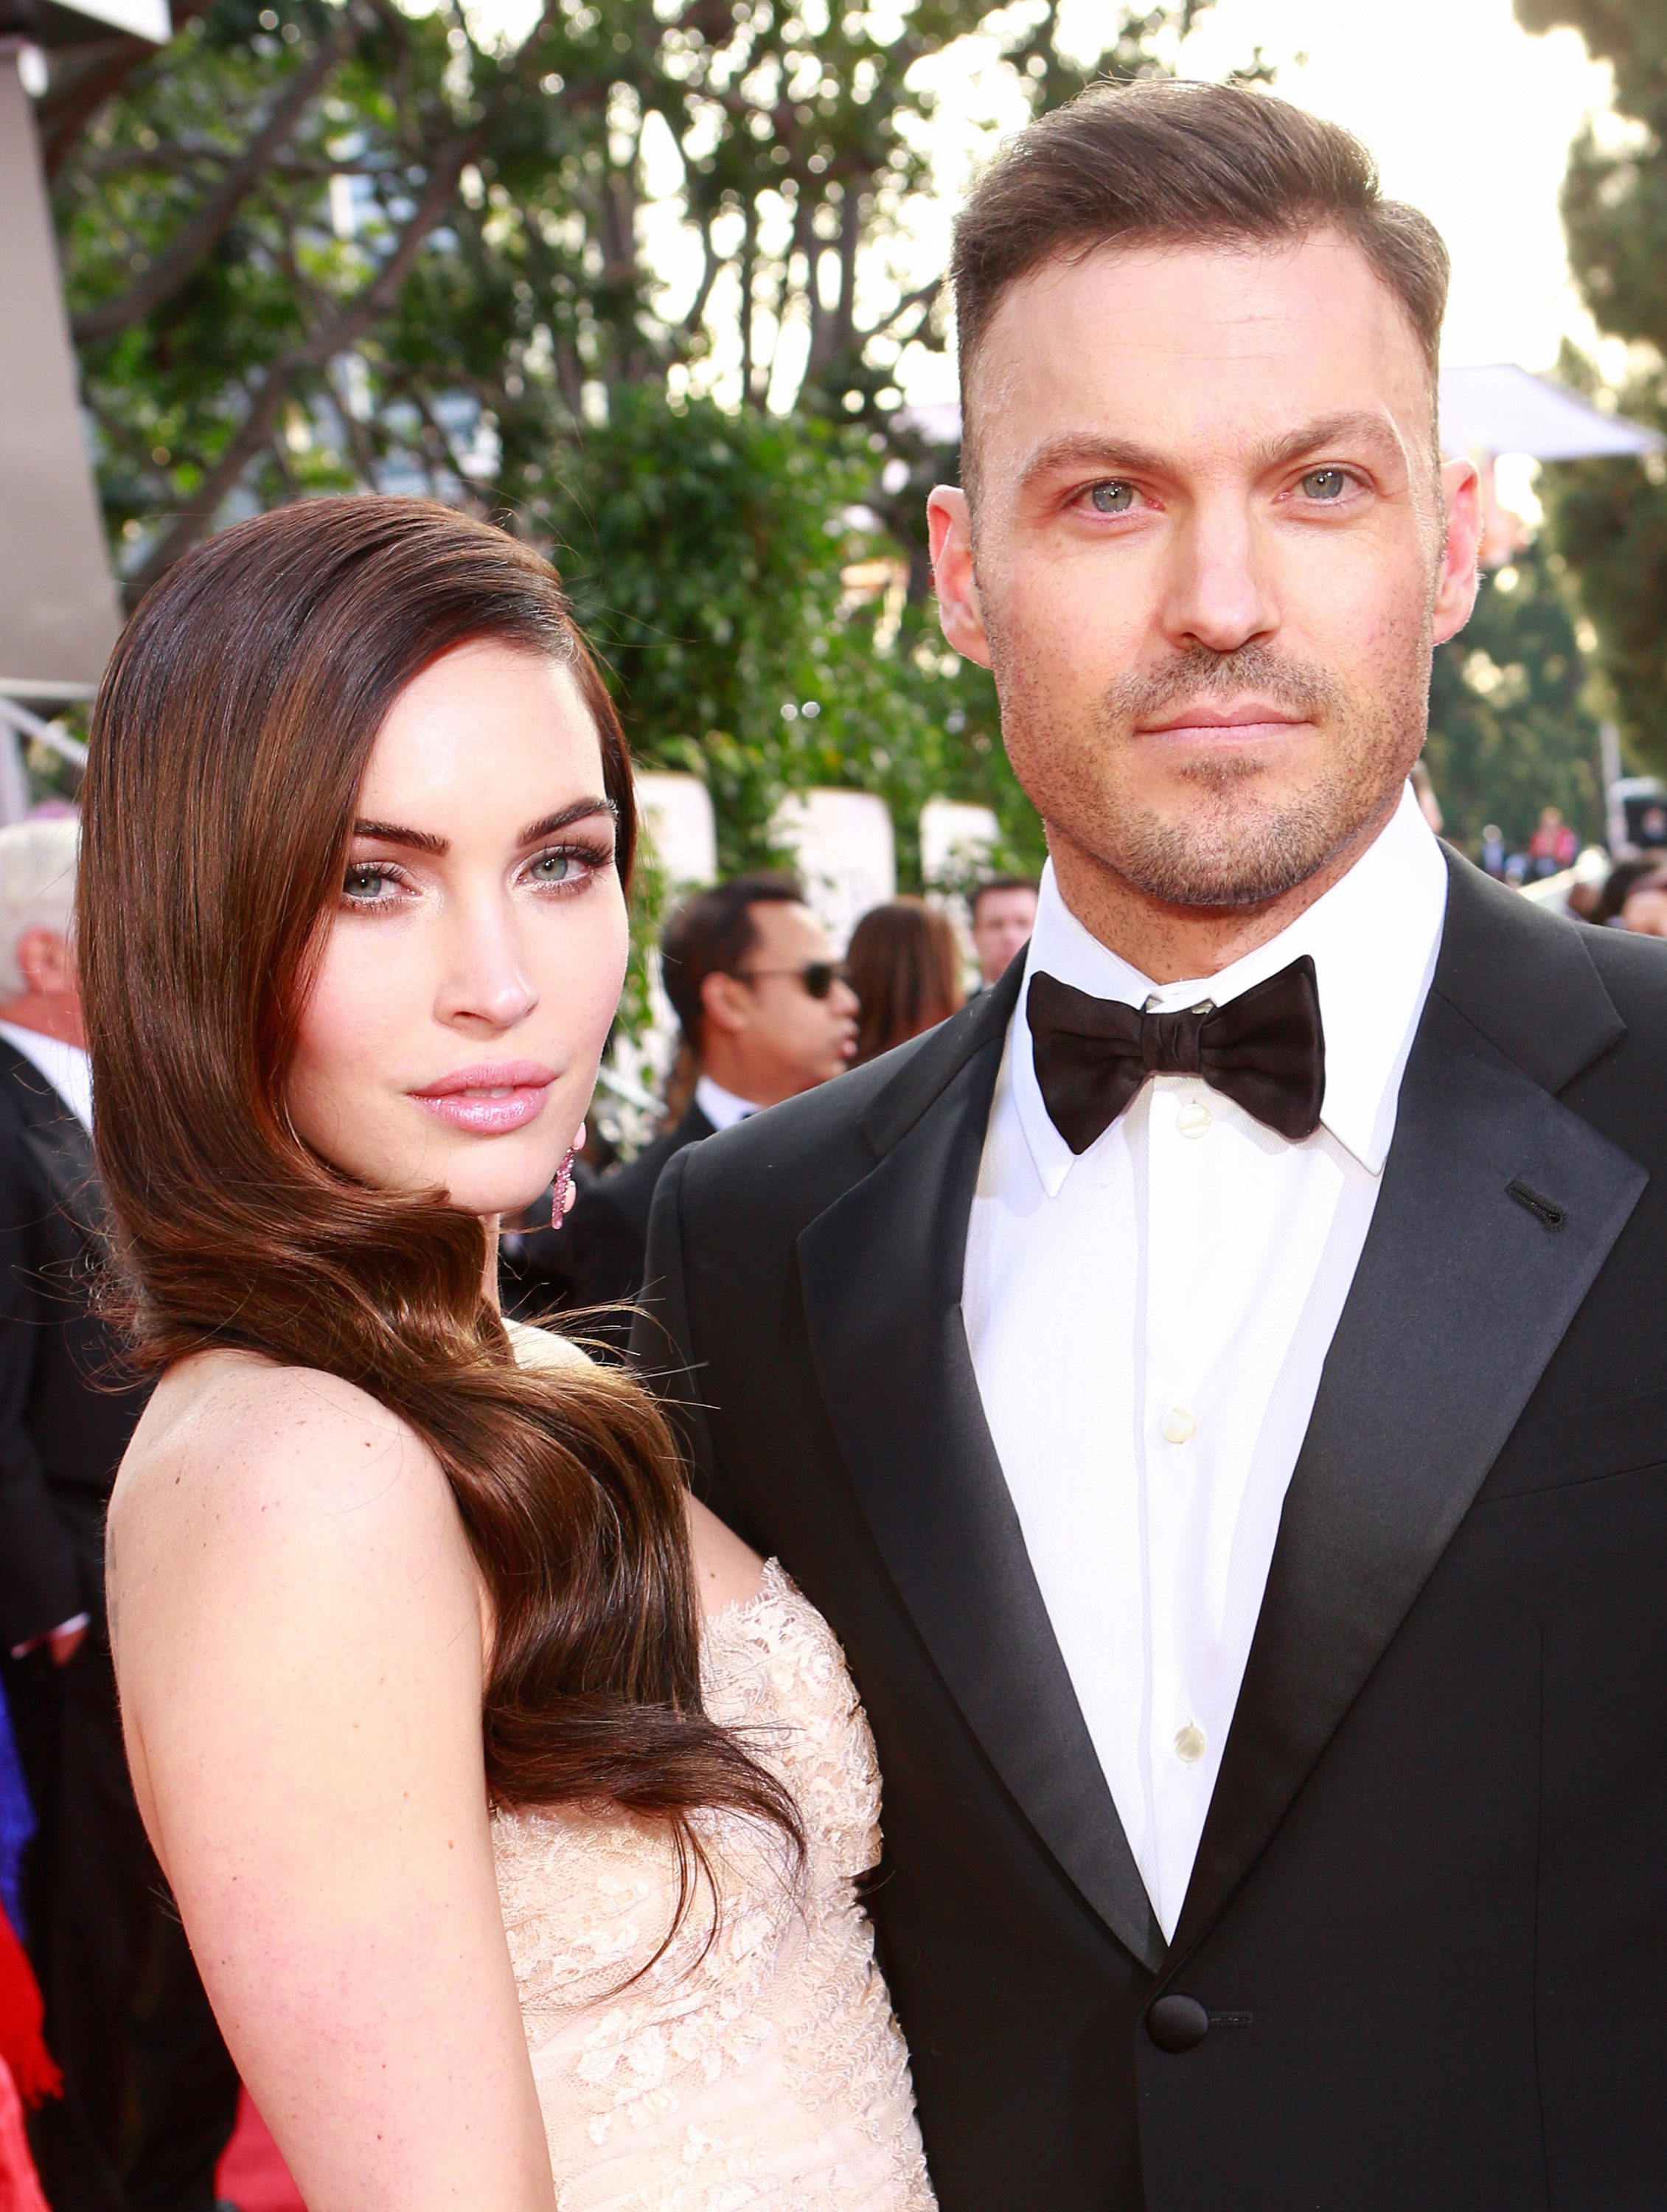 Megan Fox and actor Brian Austin Green arrive to the 70th Annual Golden Globe Awards held at the Beverly Hilton Hotel on January 13, 2013. | Source: Getty Images